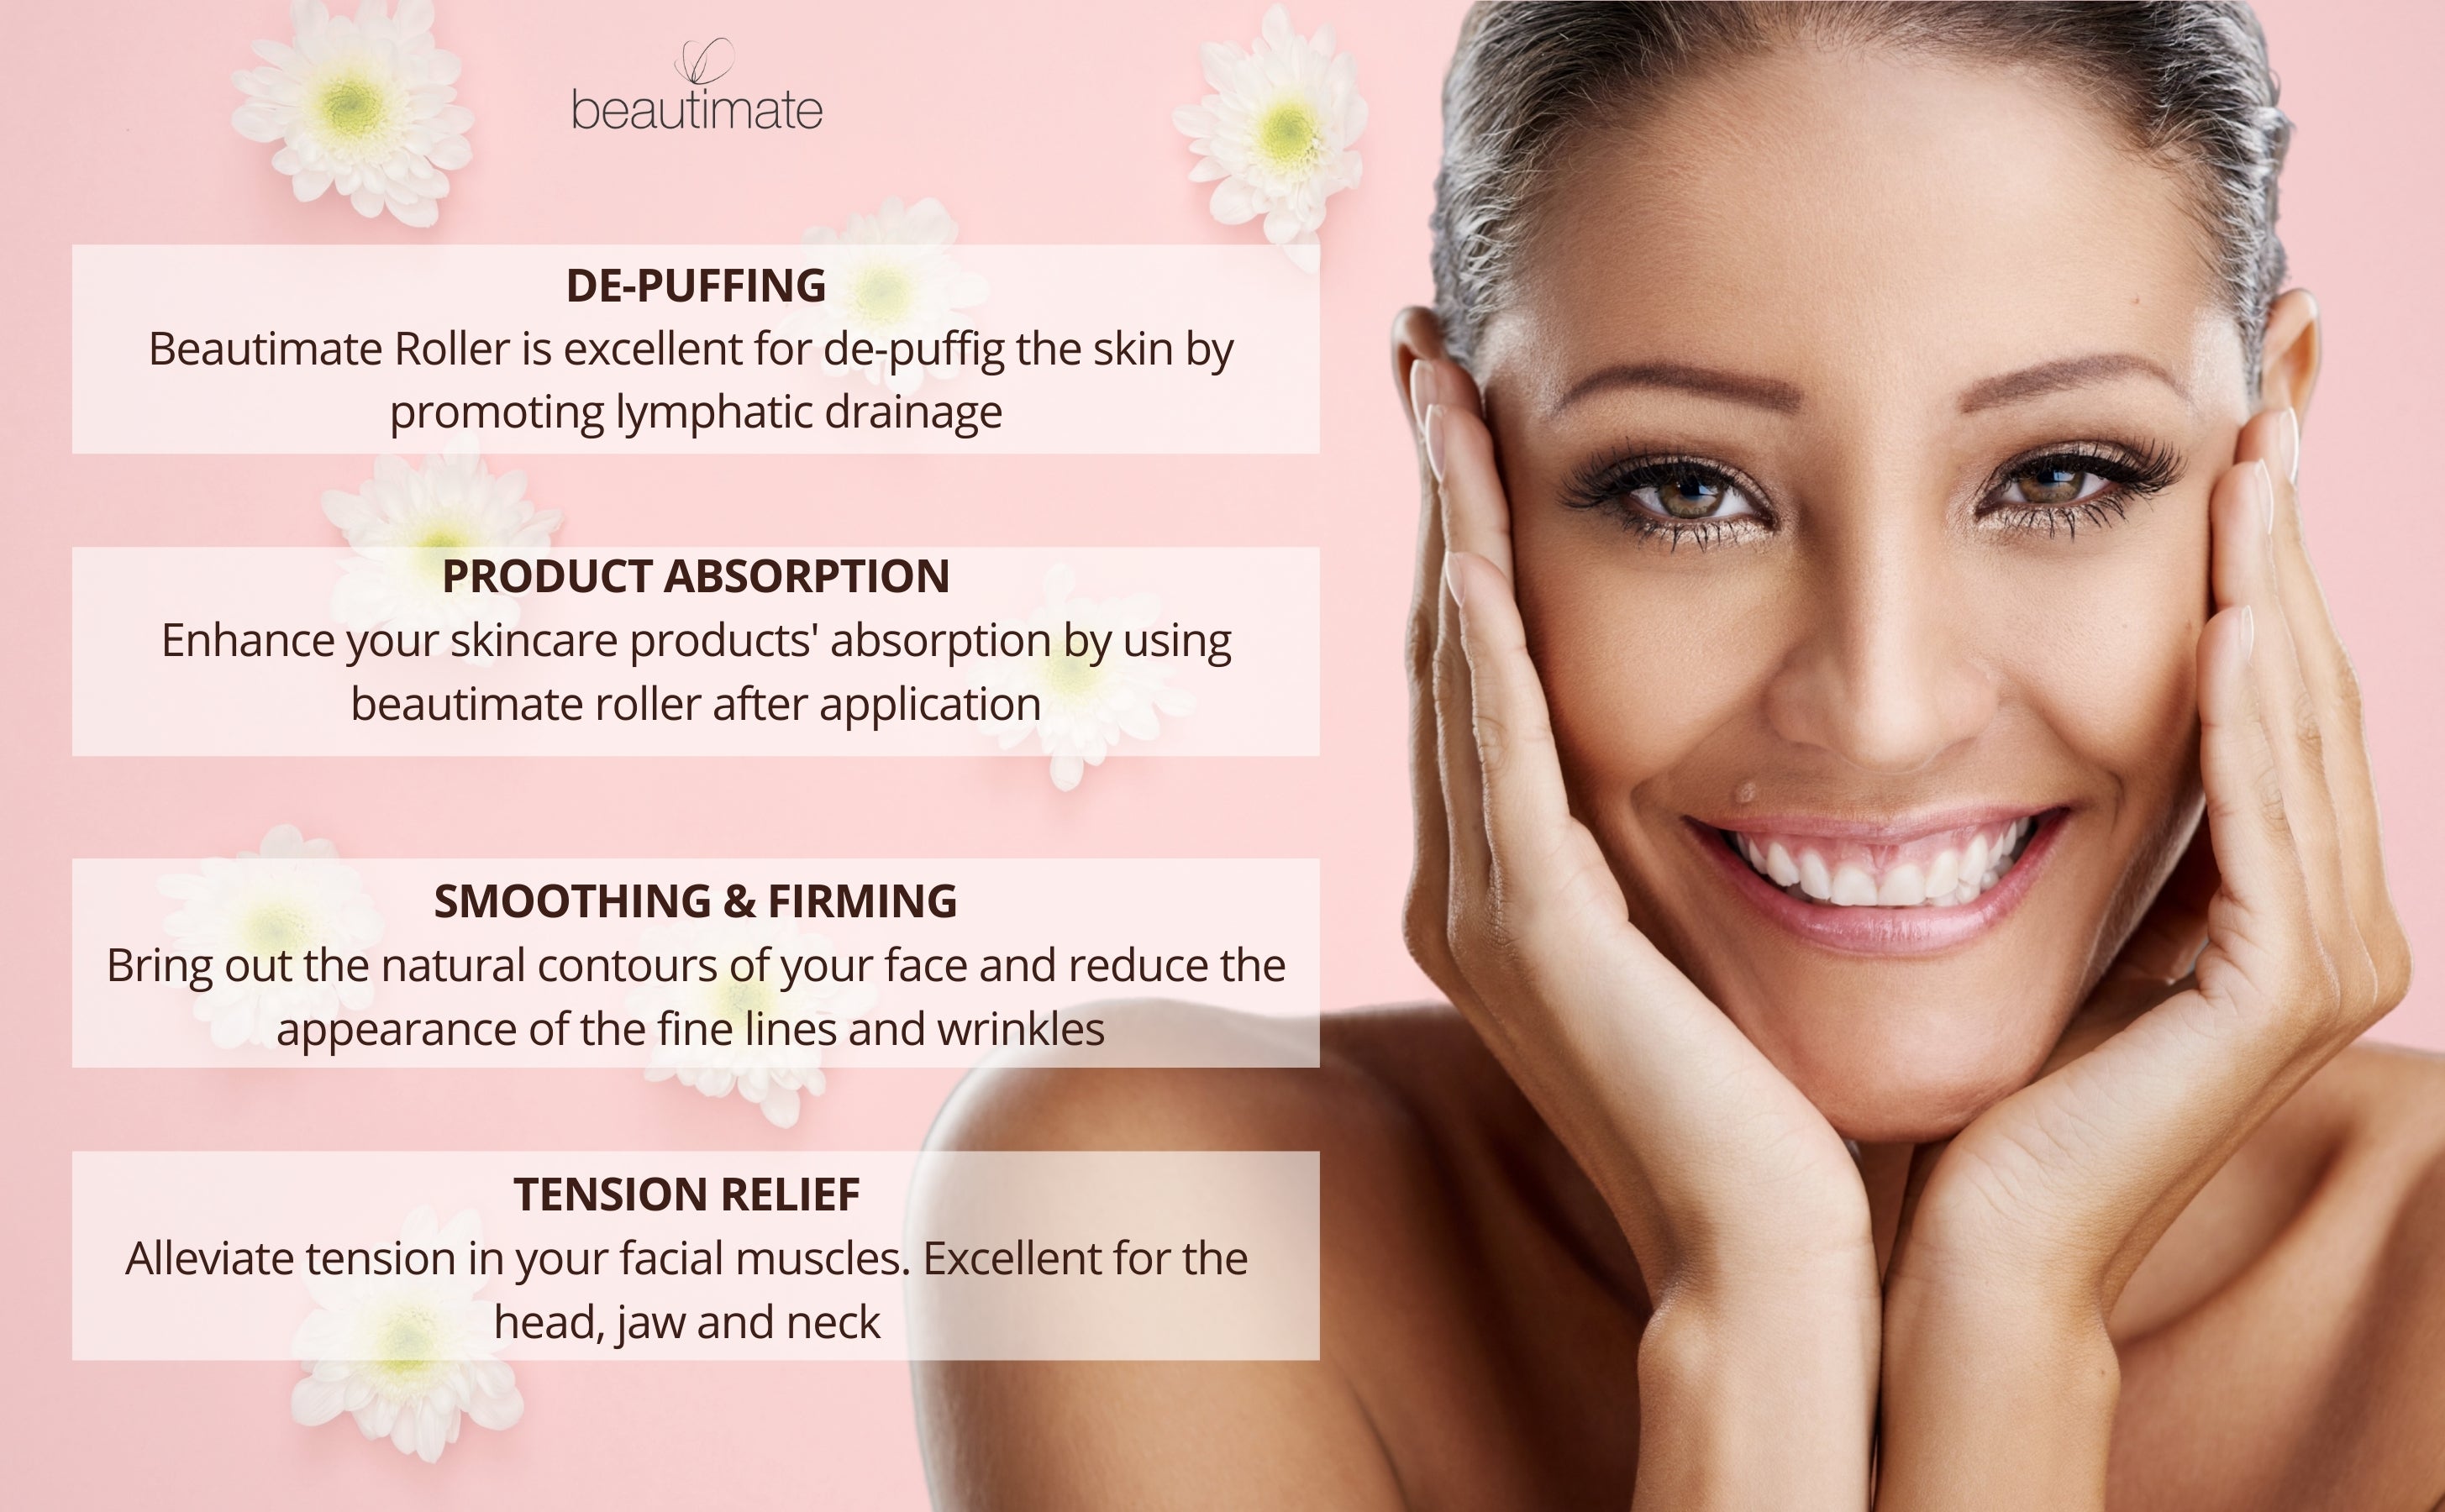 benefit list of using our roller